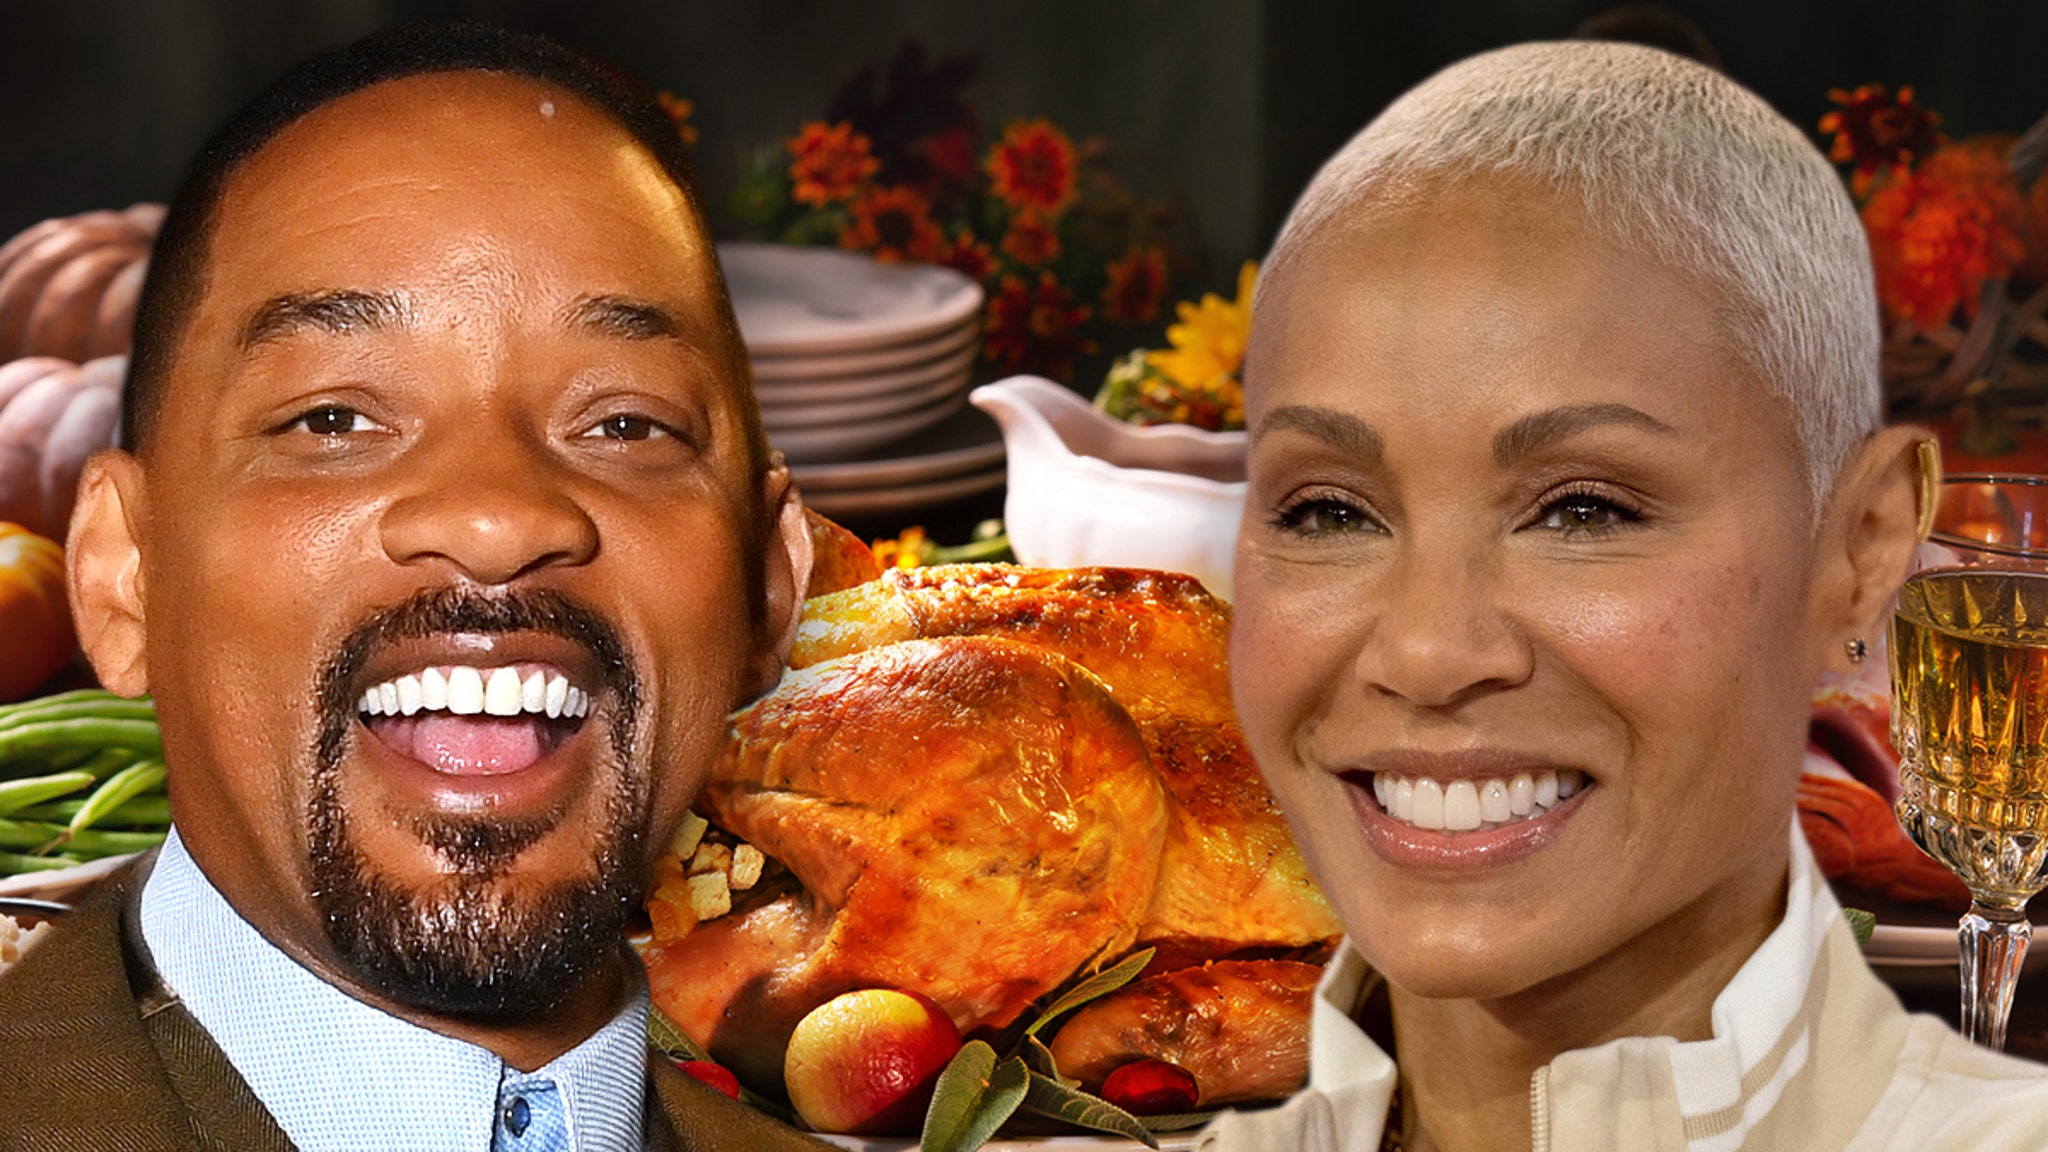 Will Smith and Jada Pinkett Smith pose together for Thanksgiving shoot